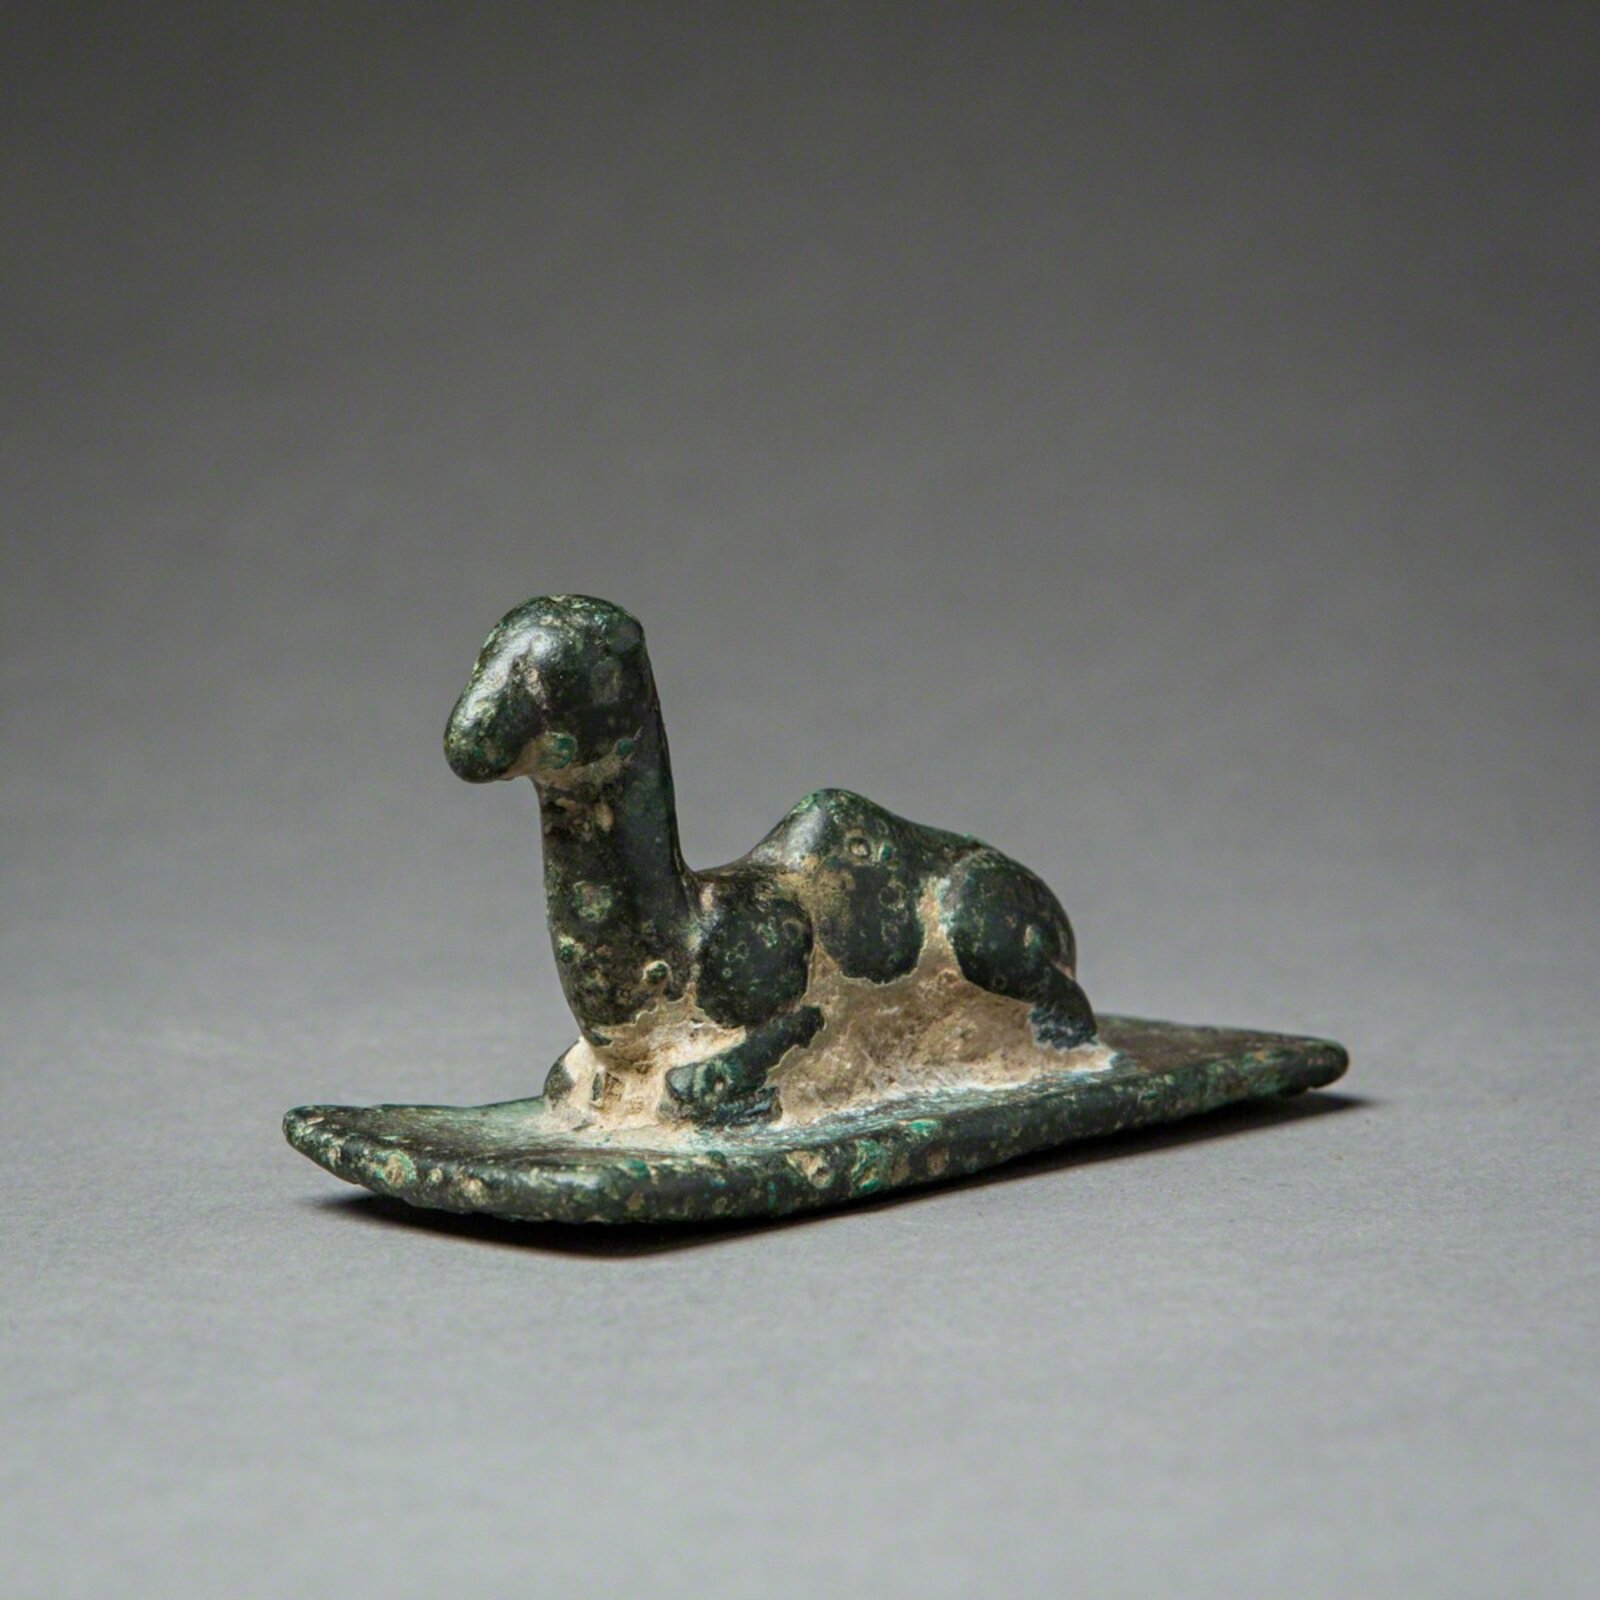 Biblical | Nabatean Bronze Sculpture of a Camel (300 BC to 100 AD) | Artsy